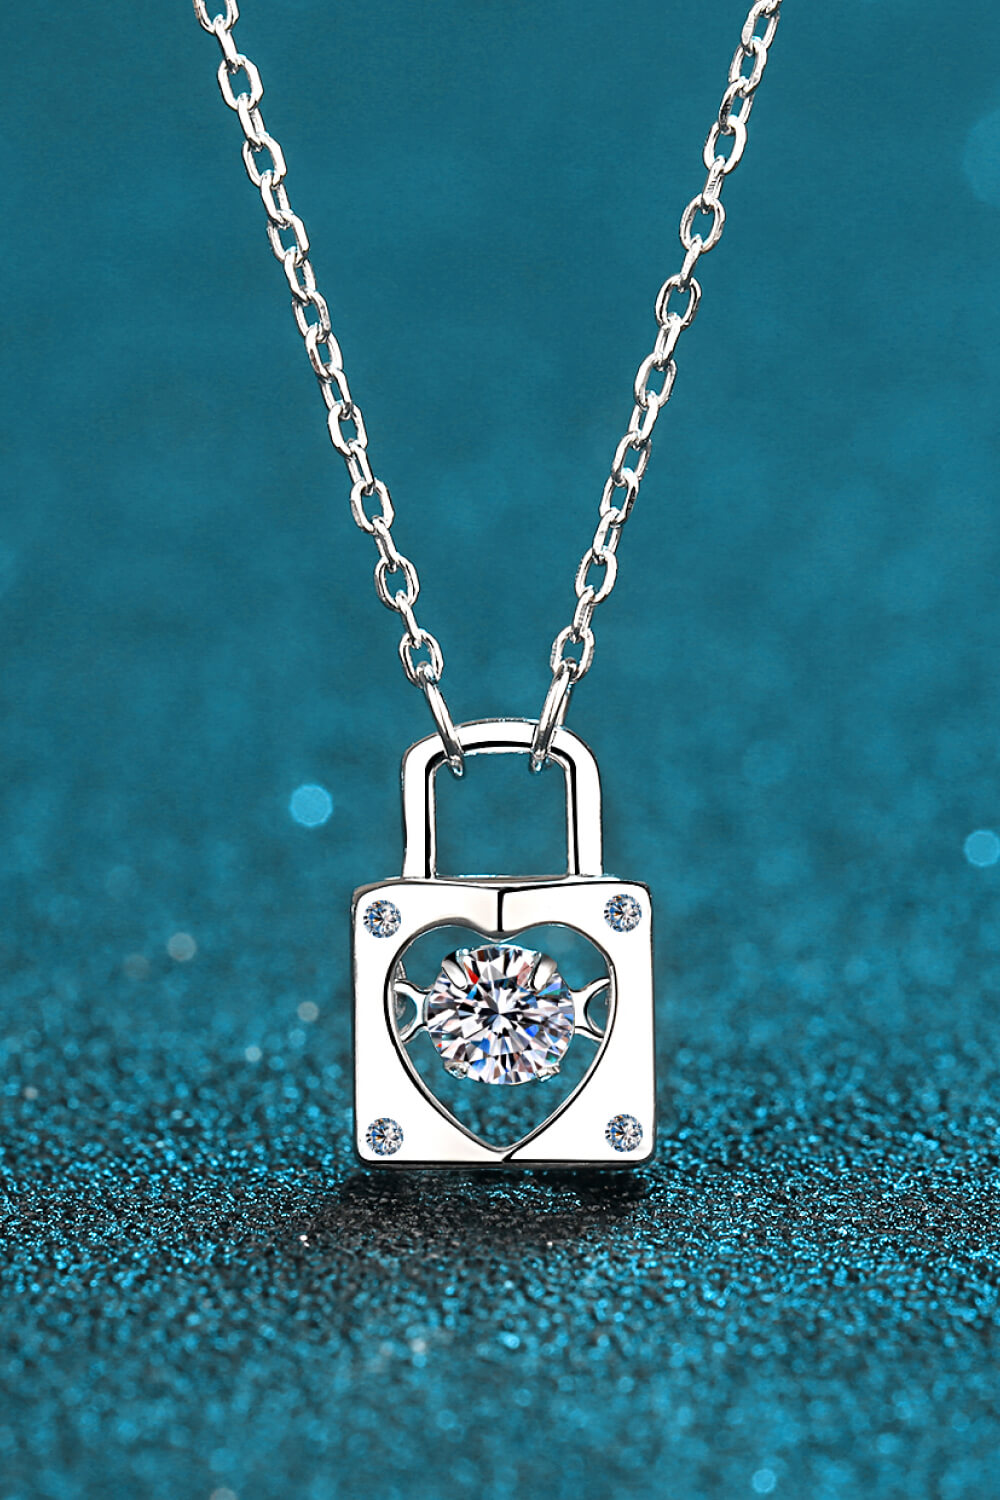 Adored Chain Necklaces Silver / One Size Baeful Moissanite Lock Pendant Necklace